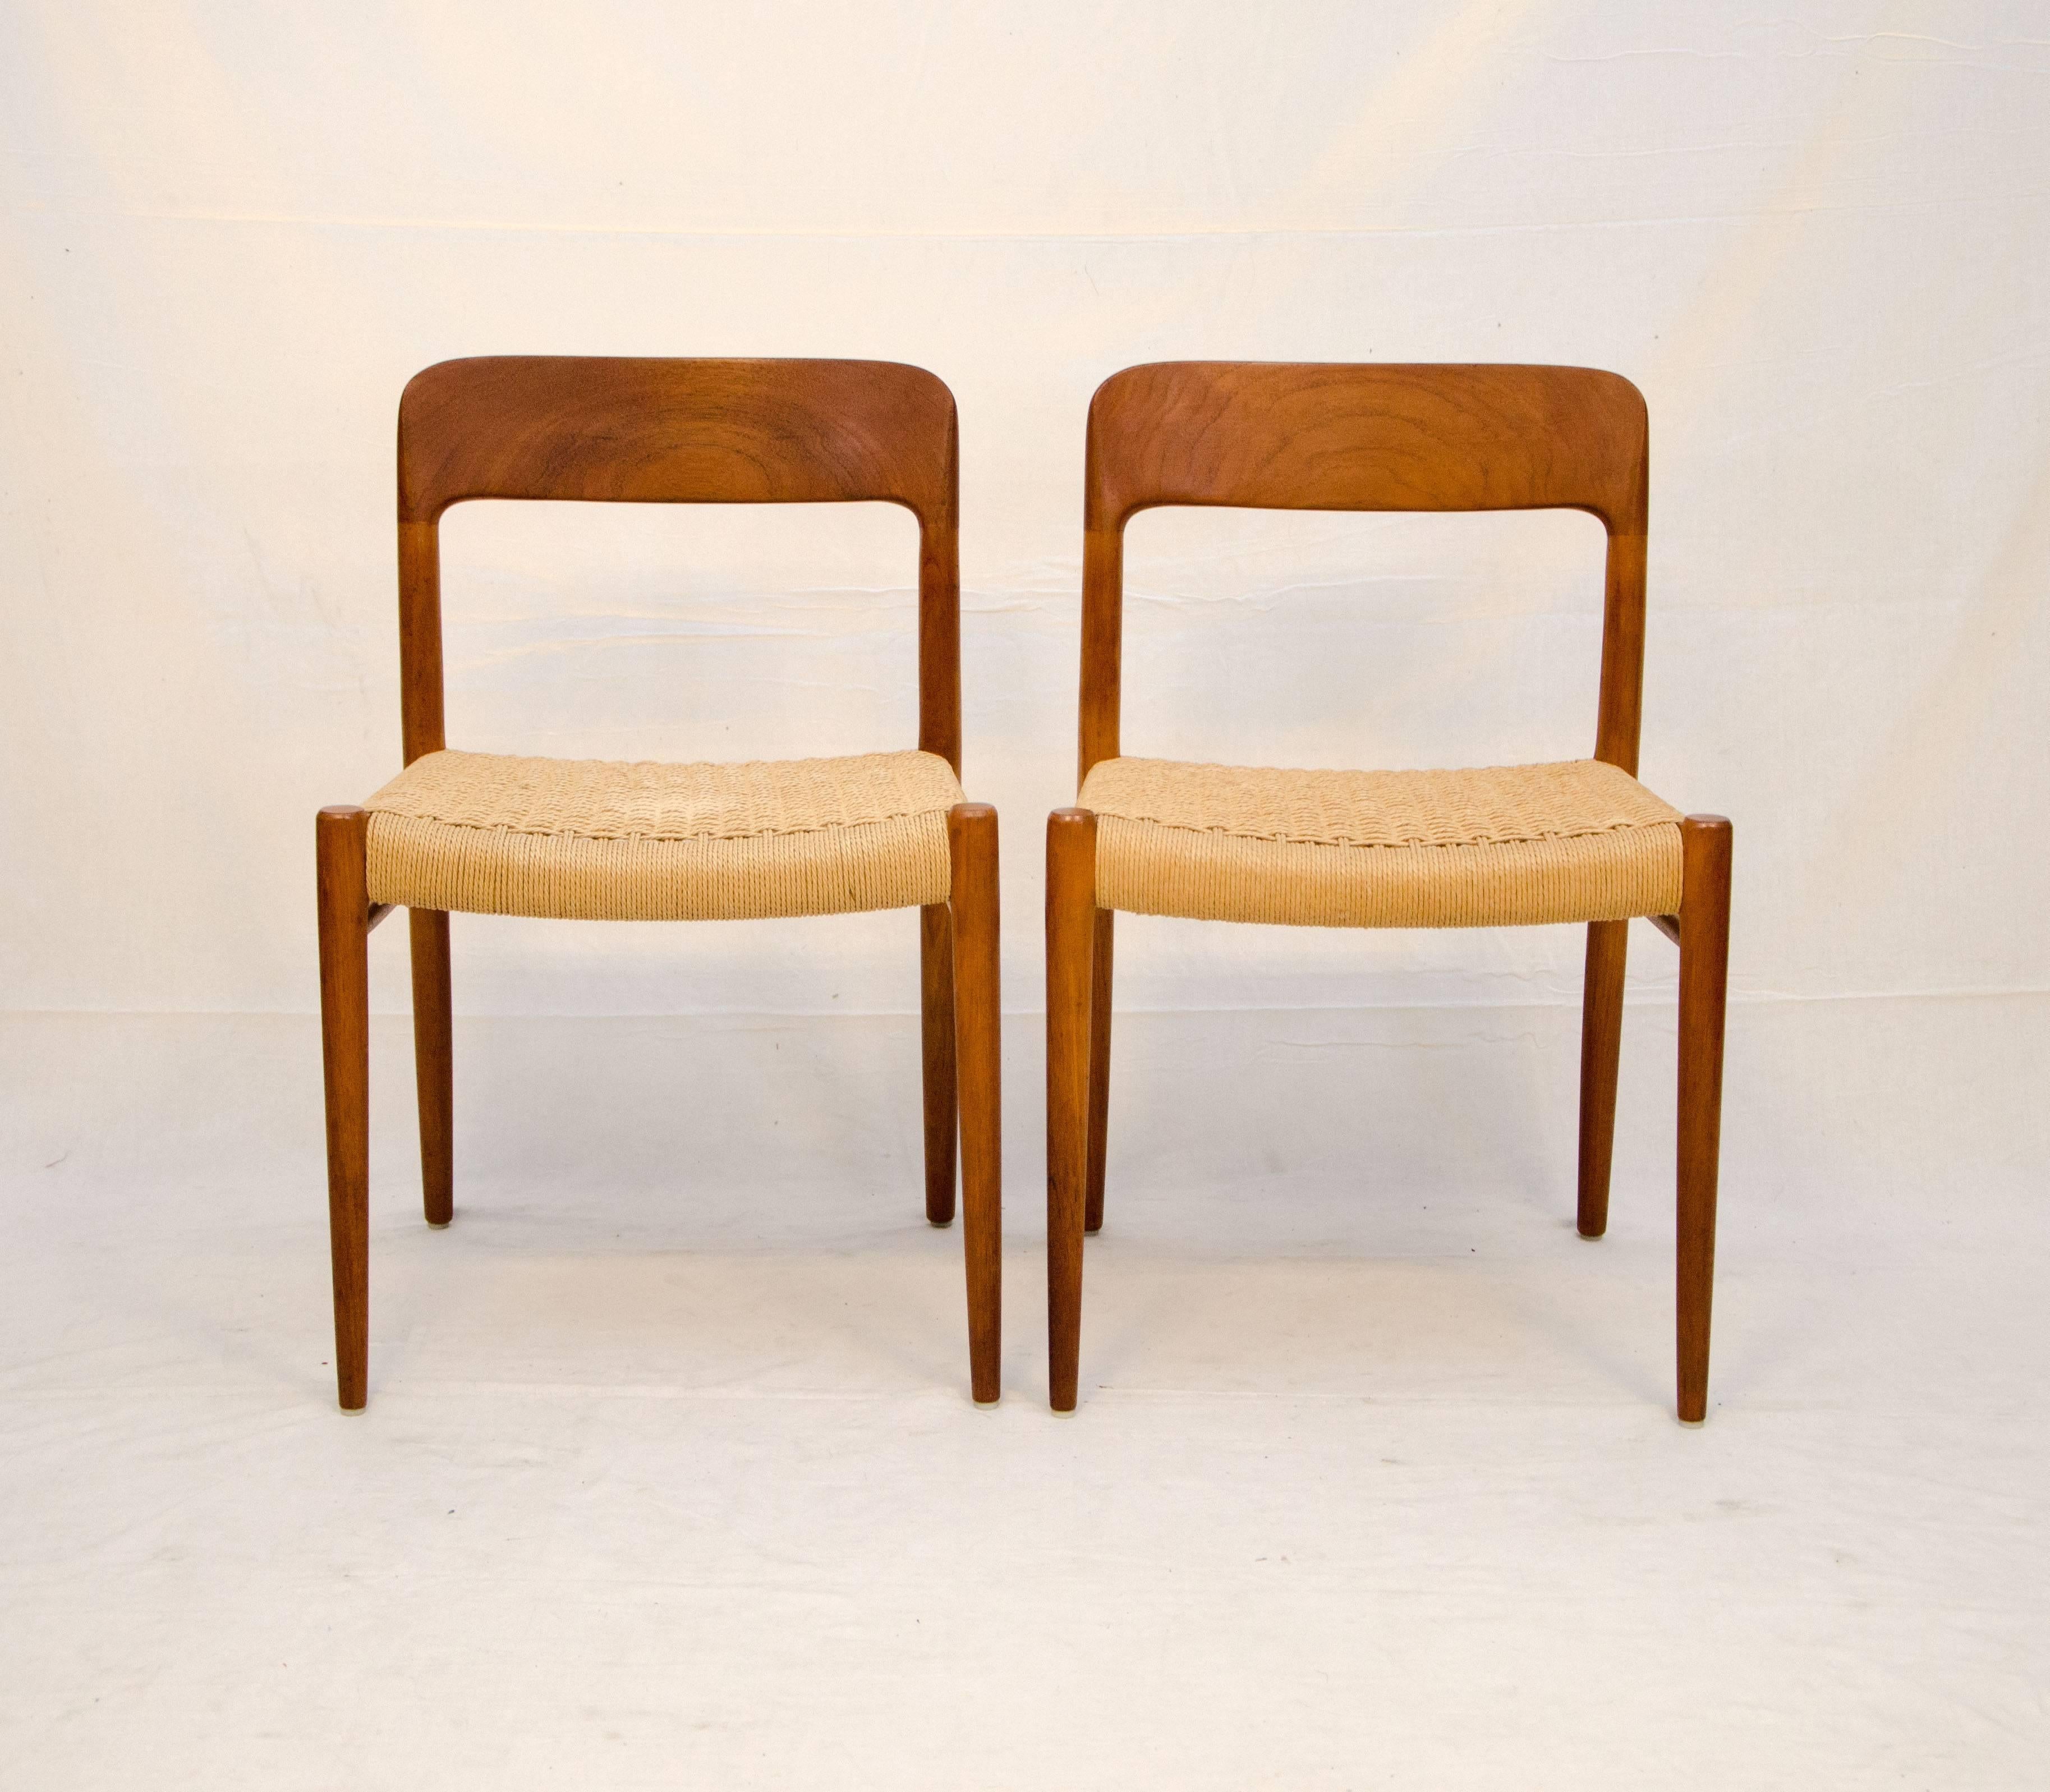 A beautiful pair of teak Danish Mid-Century Modern dining chairs by Niels Otto Møller for J.L. Møller. This model was Møller’s second ever design and proved to be very popular. The backrest is sculpted out of solid teak and gives the chair its